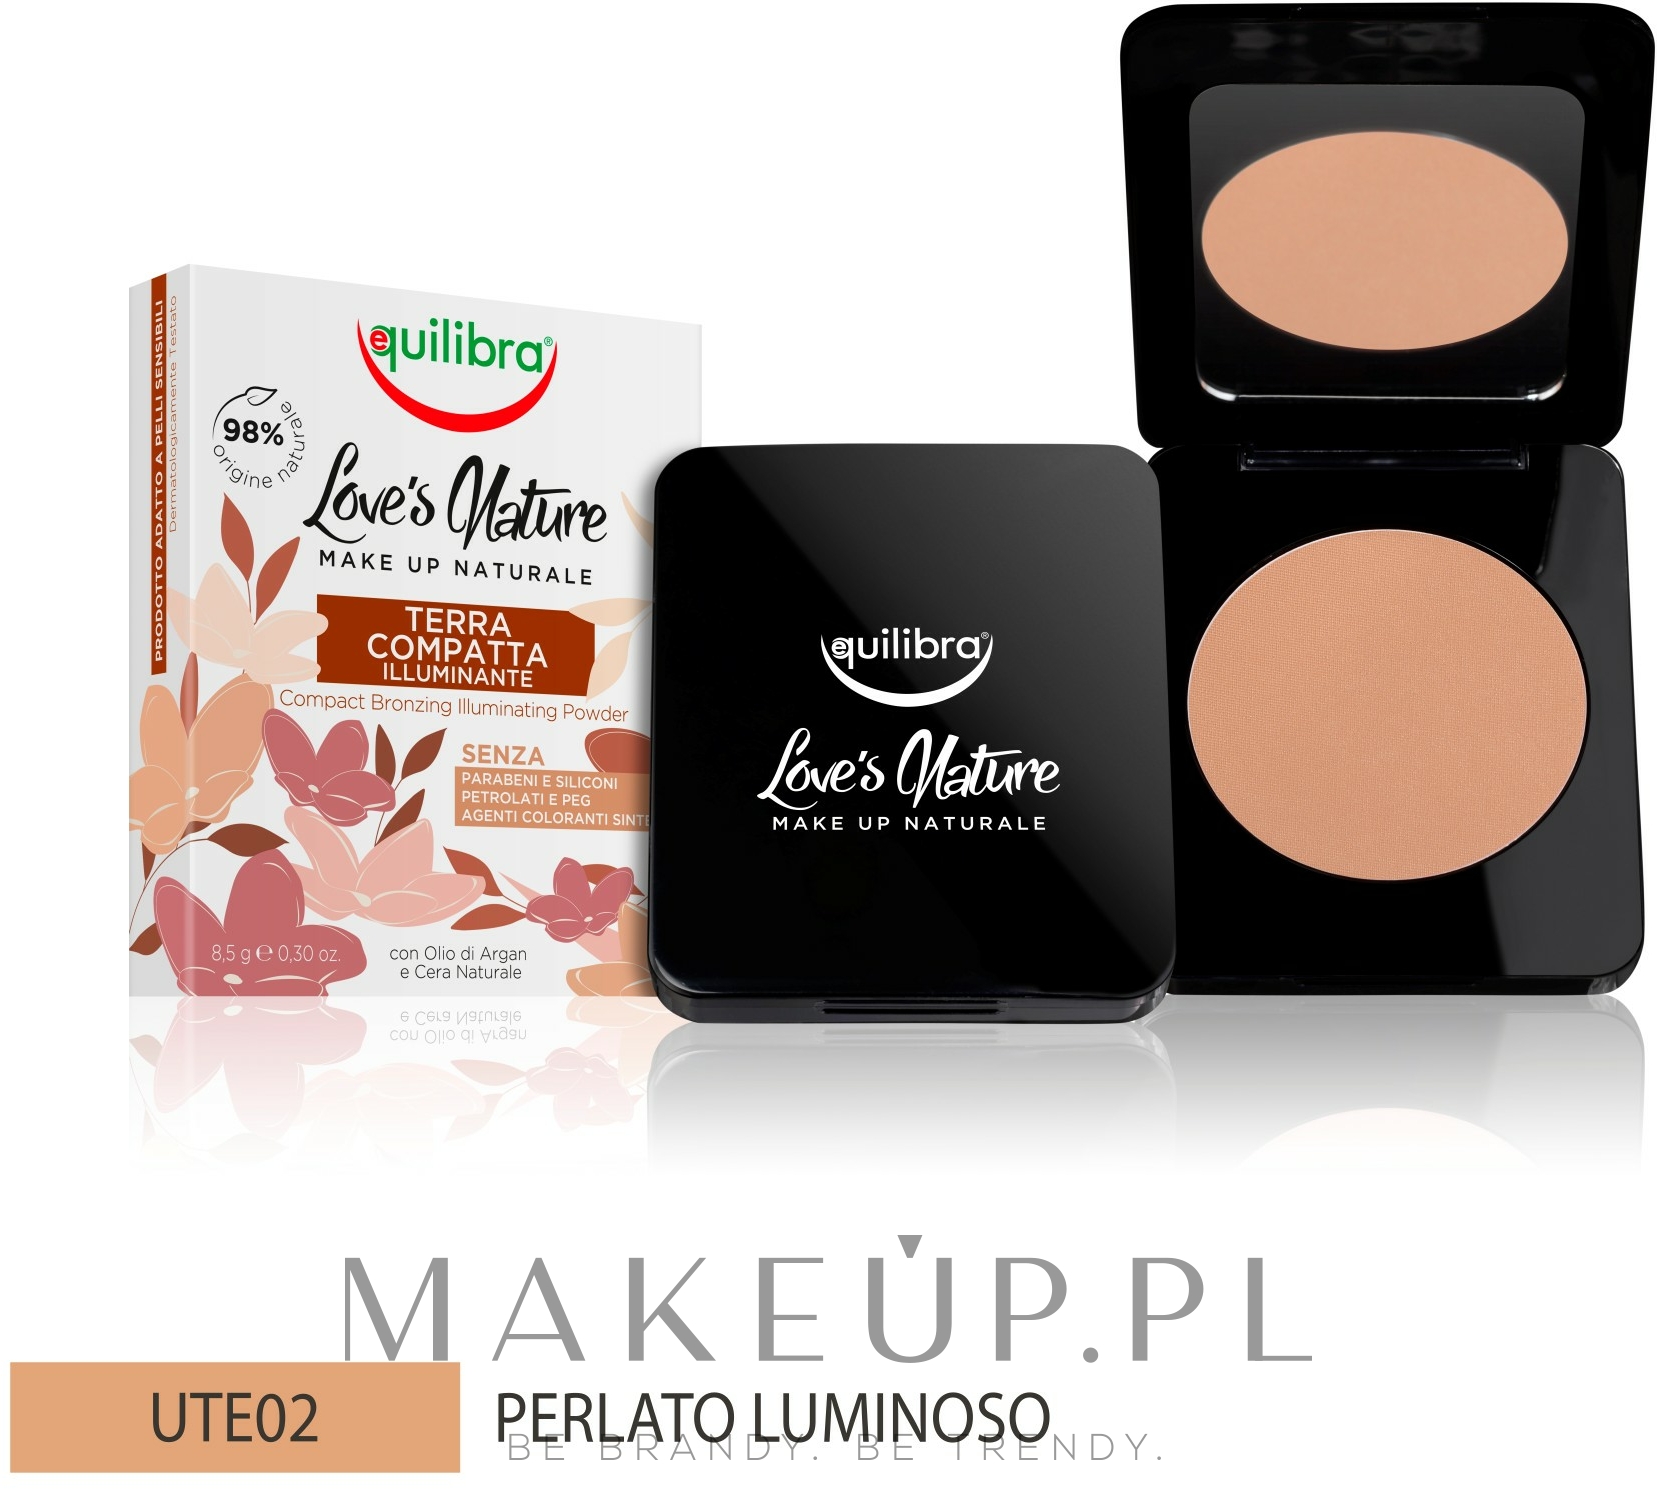 Puder w kompakcie do twarzy - Equilibra Love’s Nature Compact Face Powder — Zdjęcie 02 - Pearly Bright